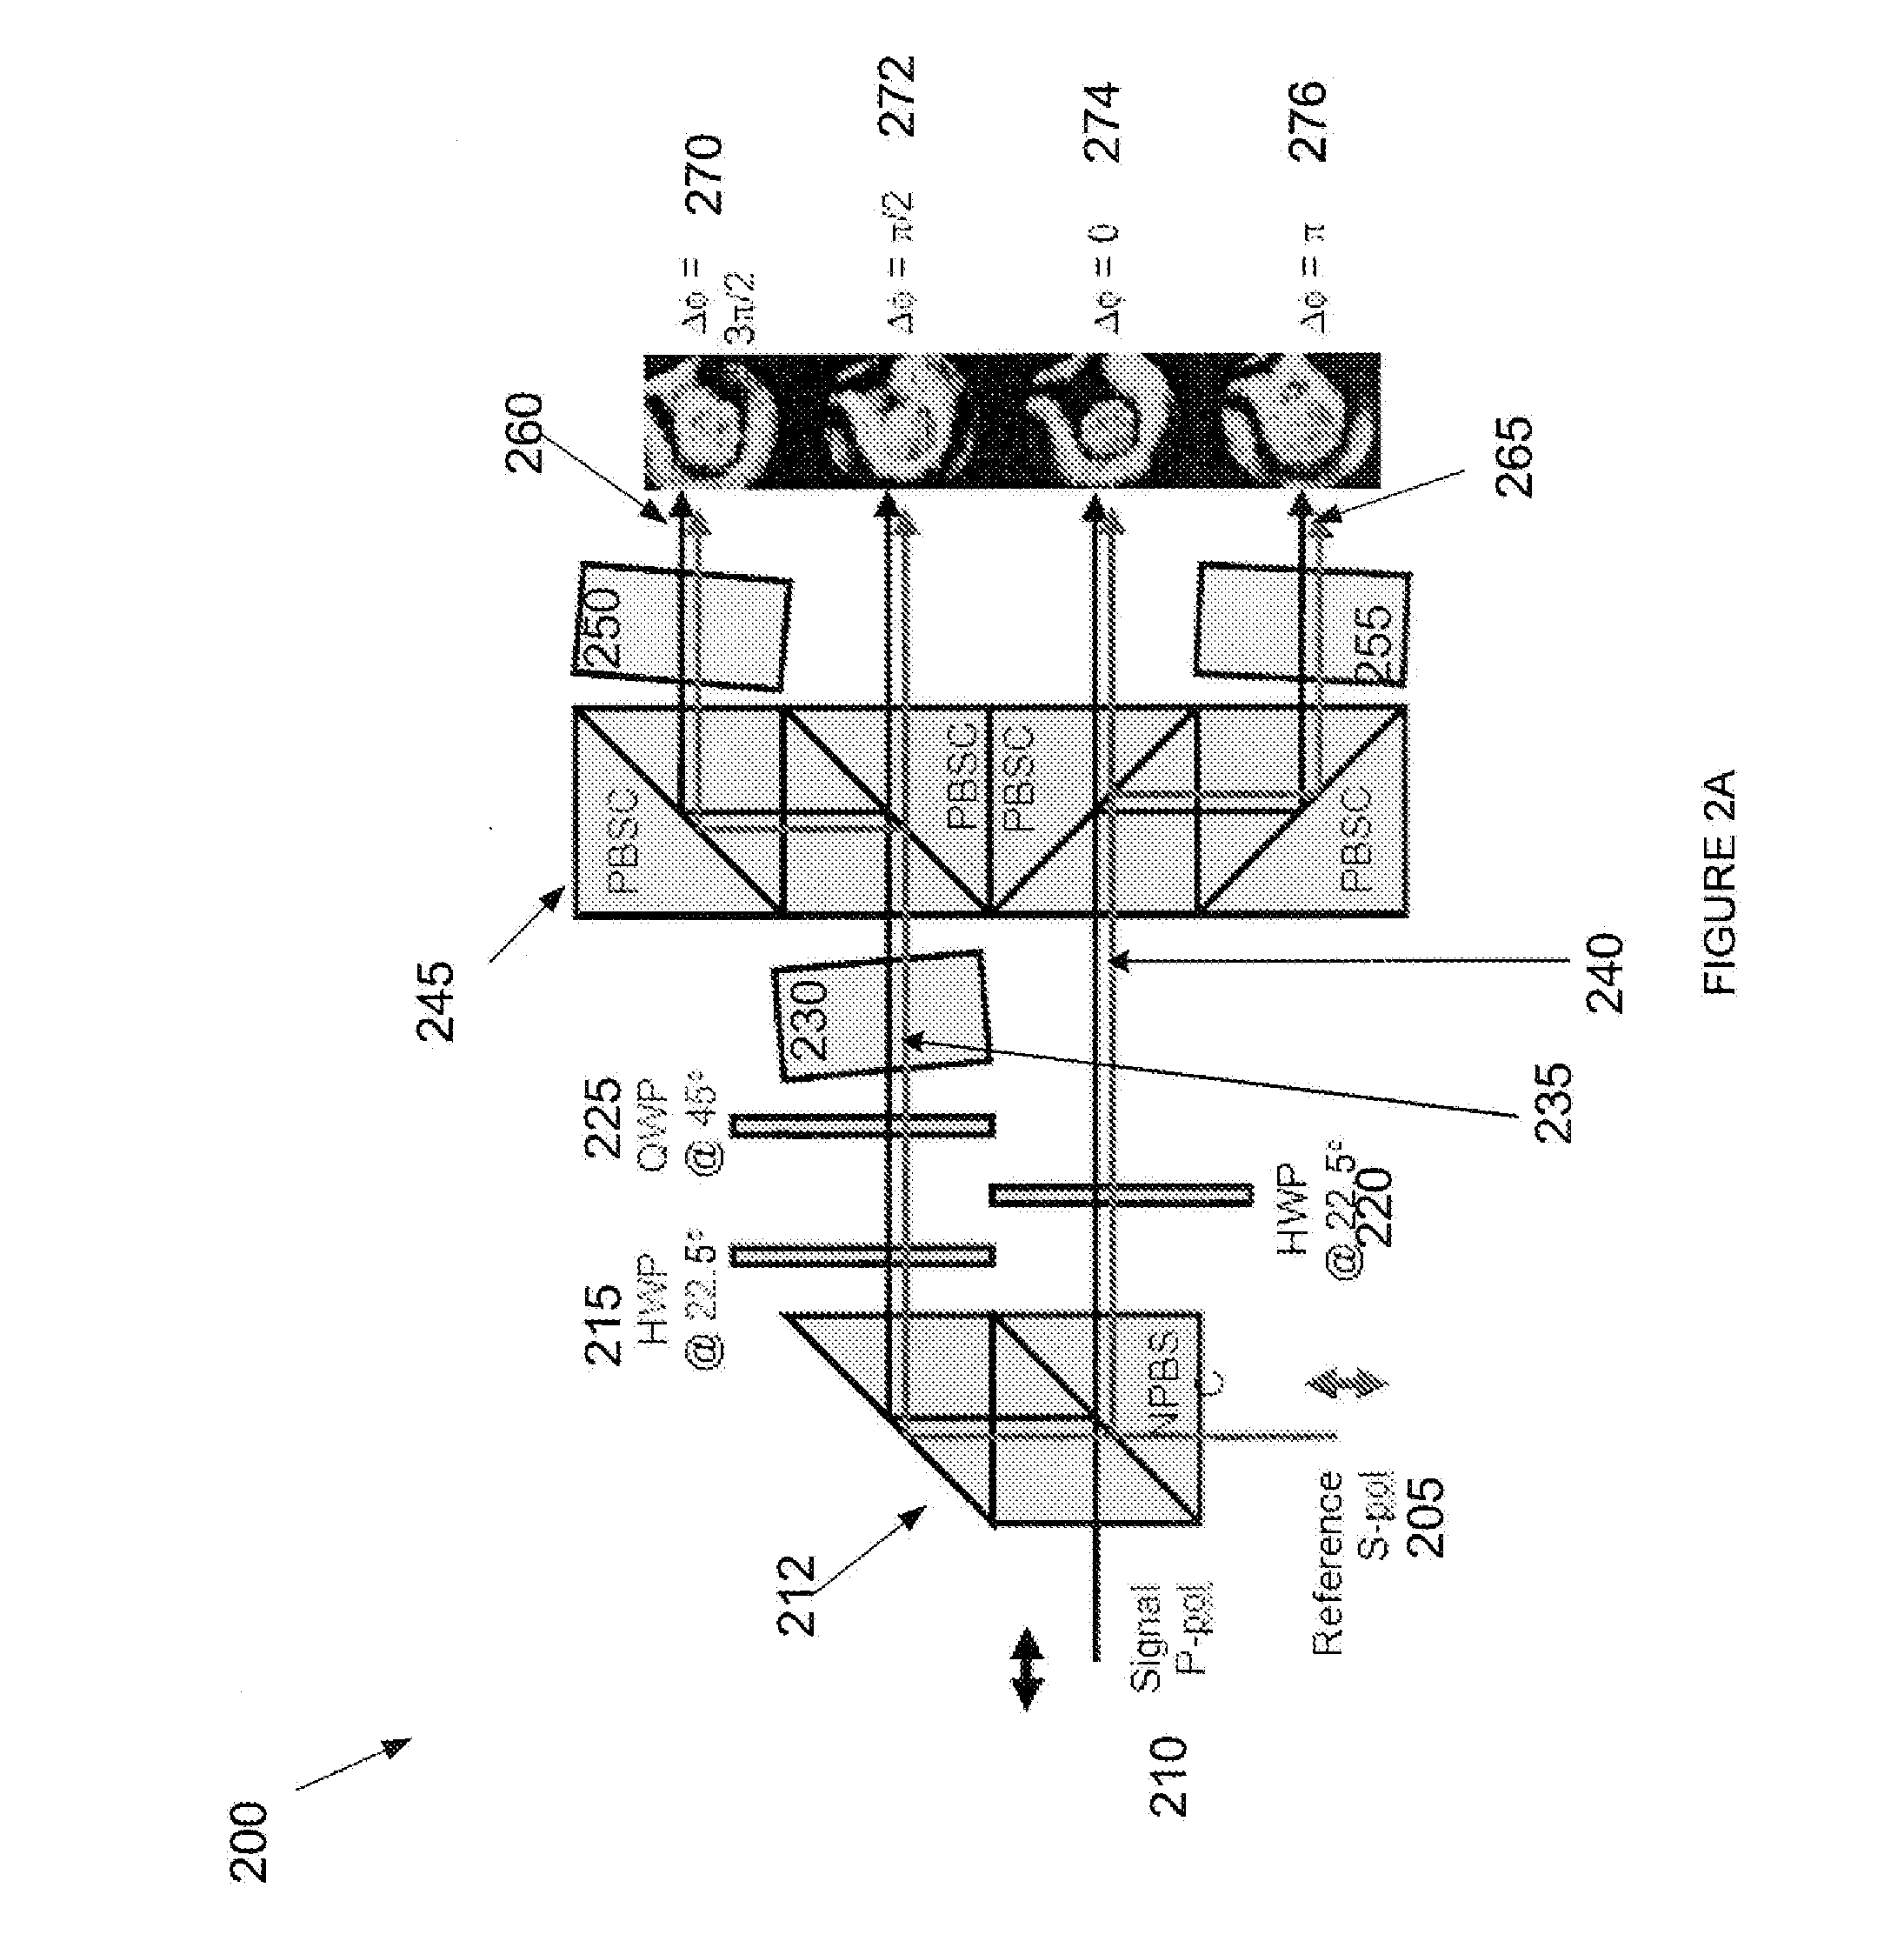 System and Method For a Self-Referencing Interferometer